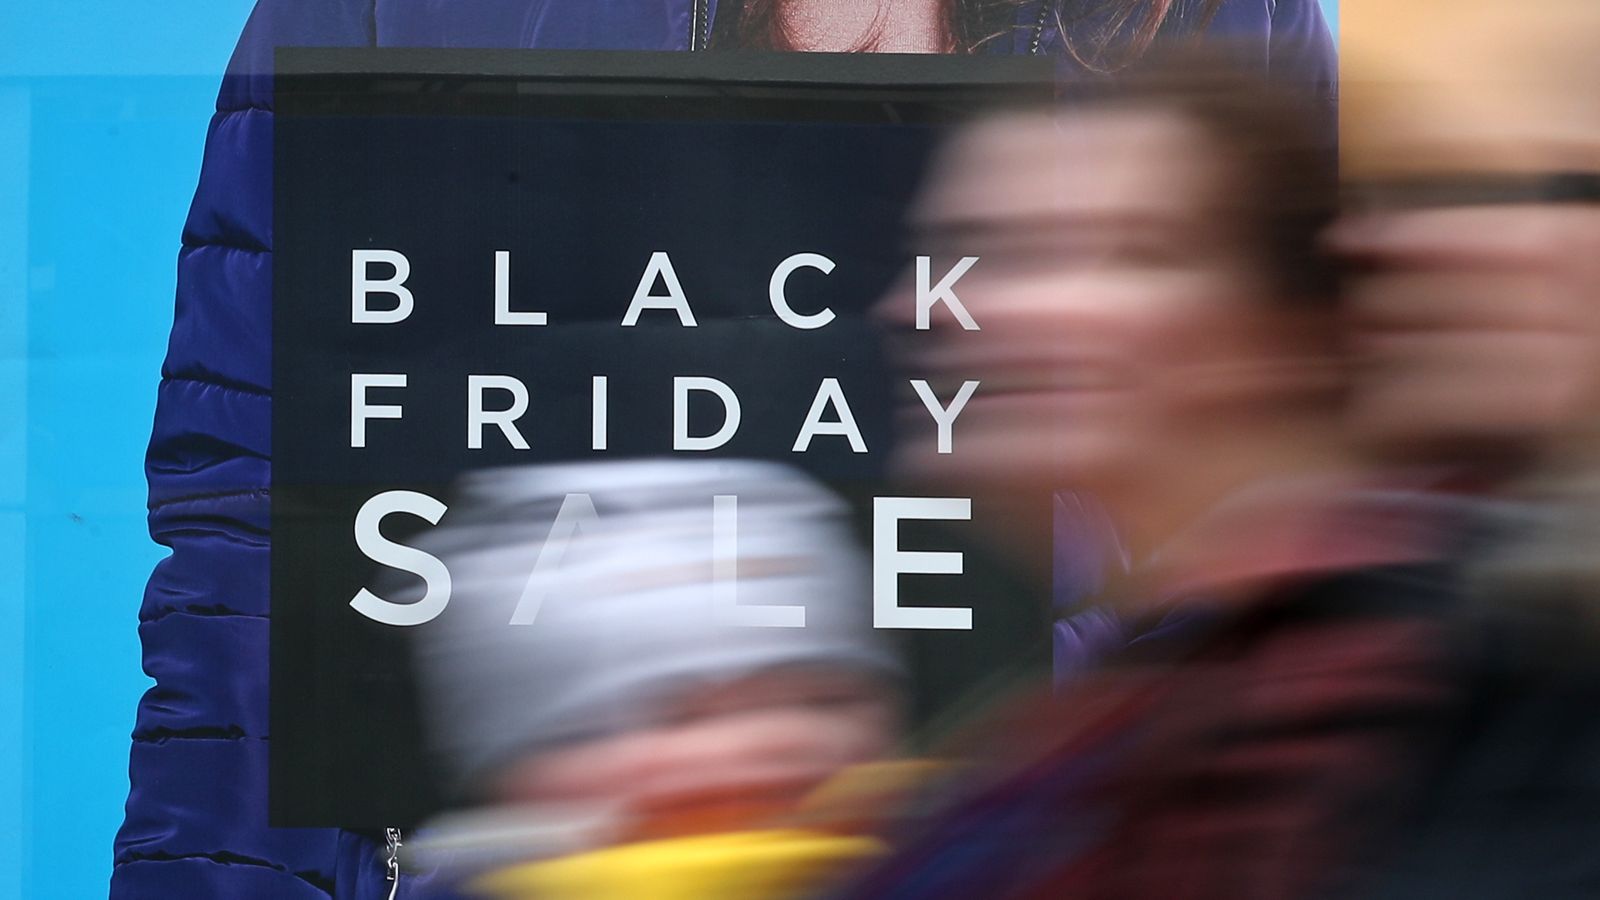 Black Friday: Nine out of 10 deals are the same price or cheaper earlier in the year, investigation says